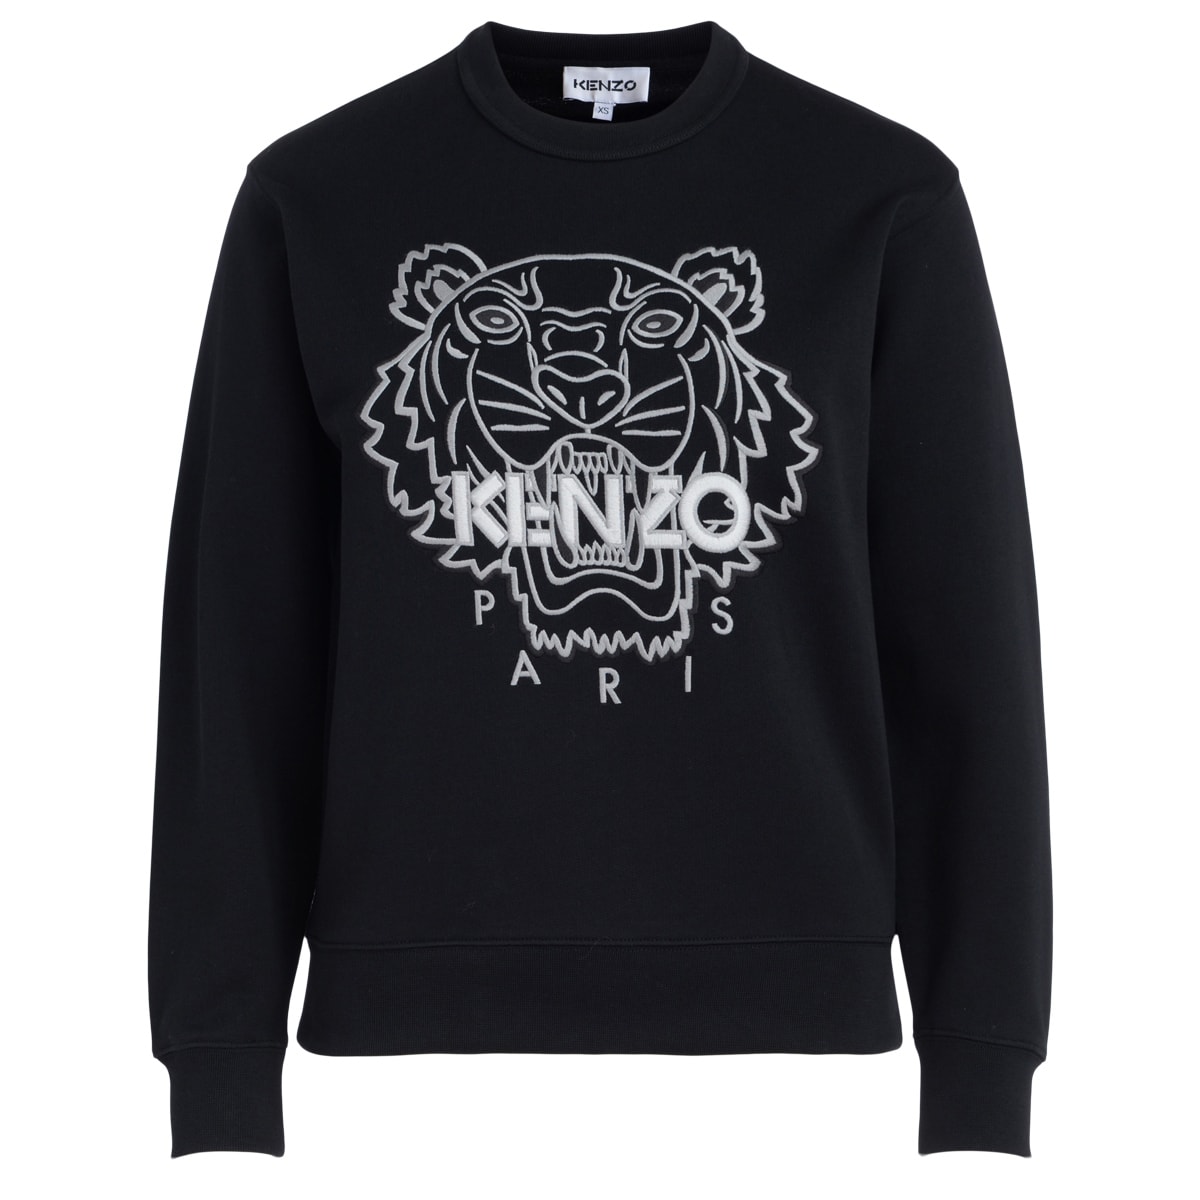 Kenzo Tiger Sweatshirt In Black Cotton With Grey Embroidery